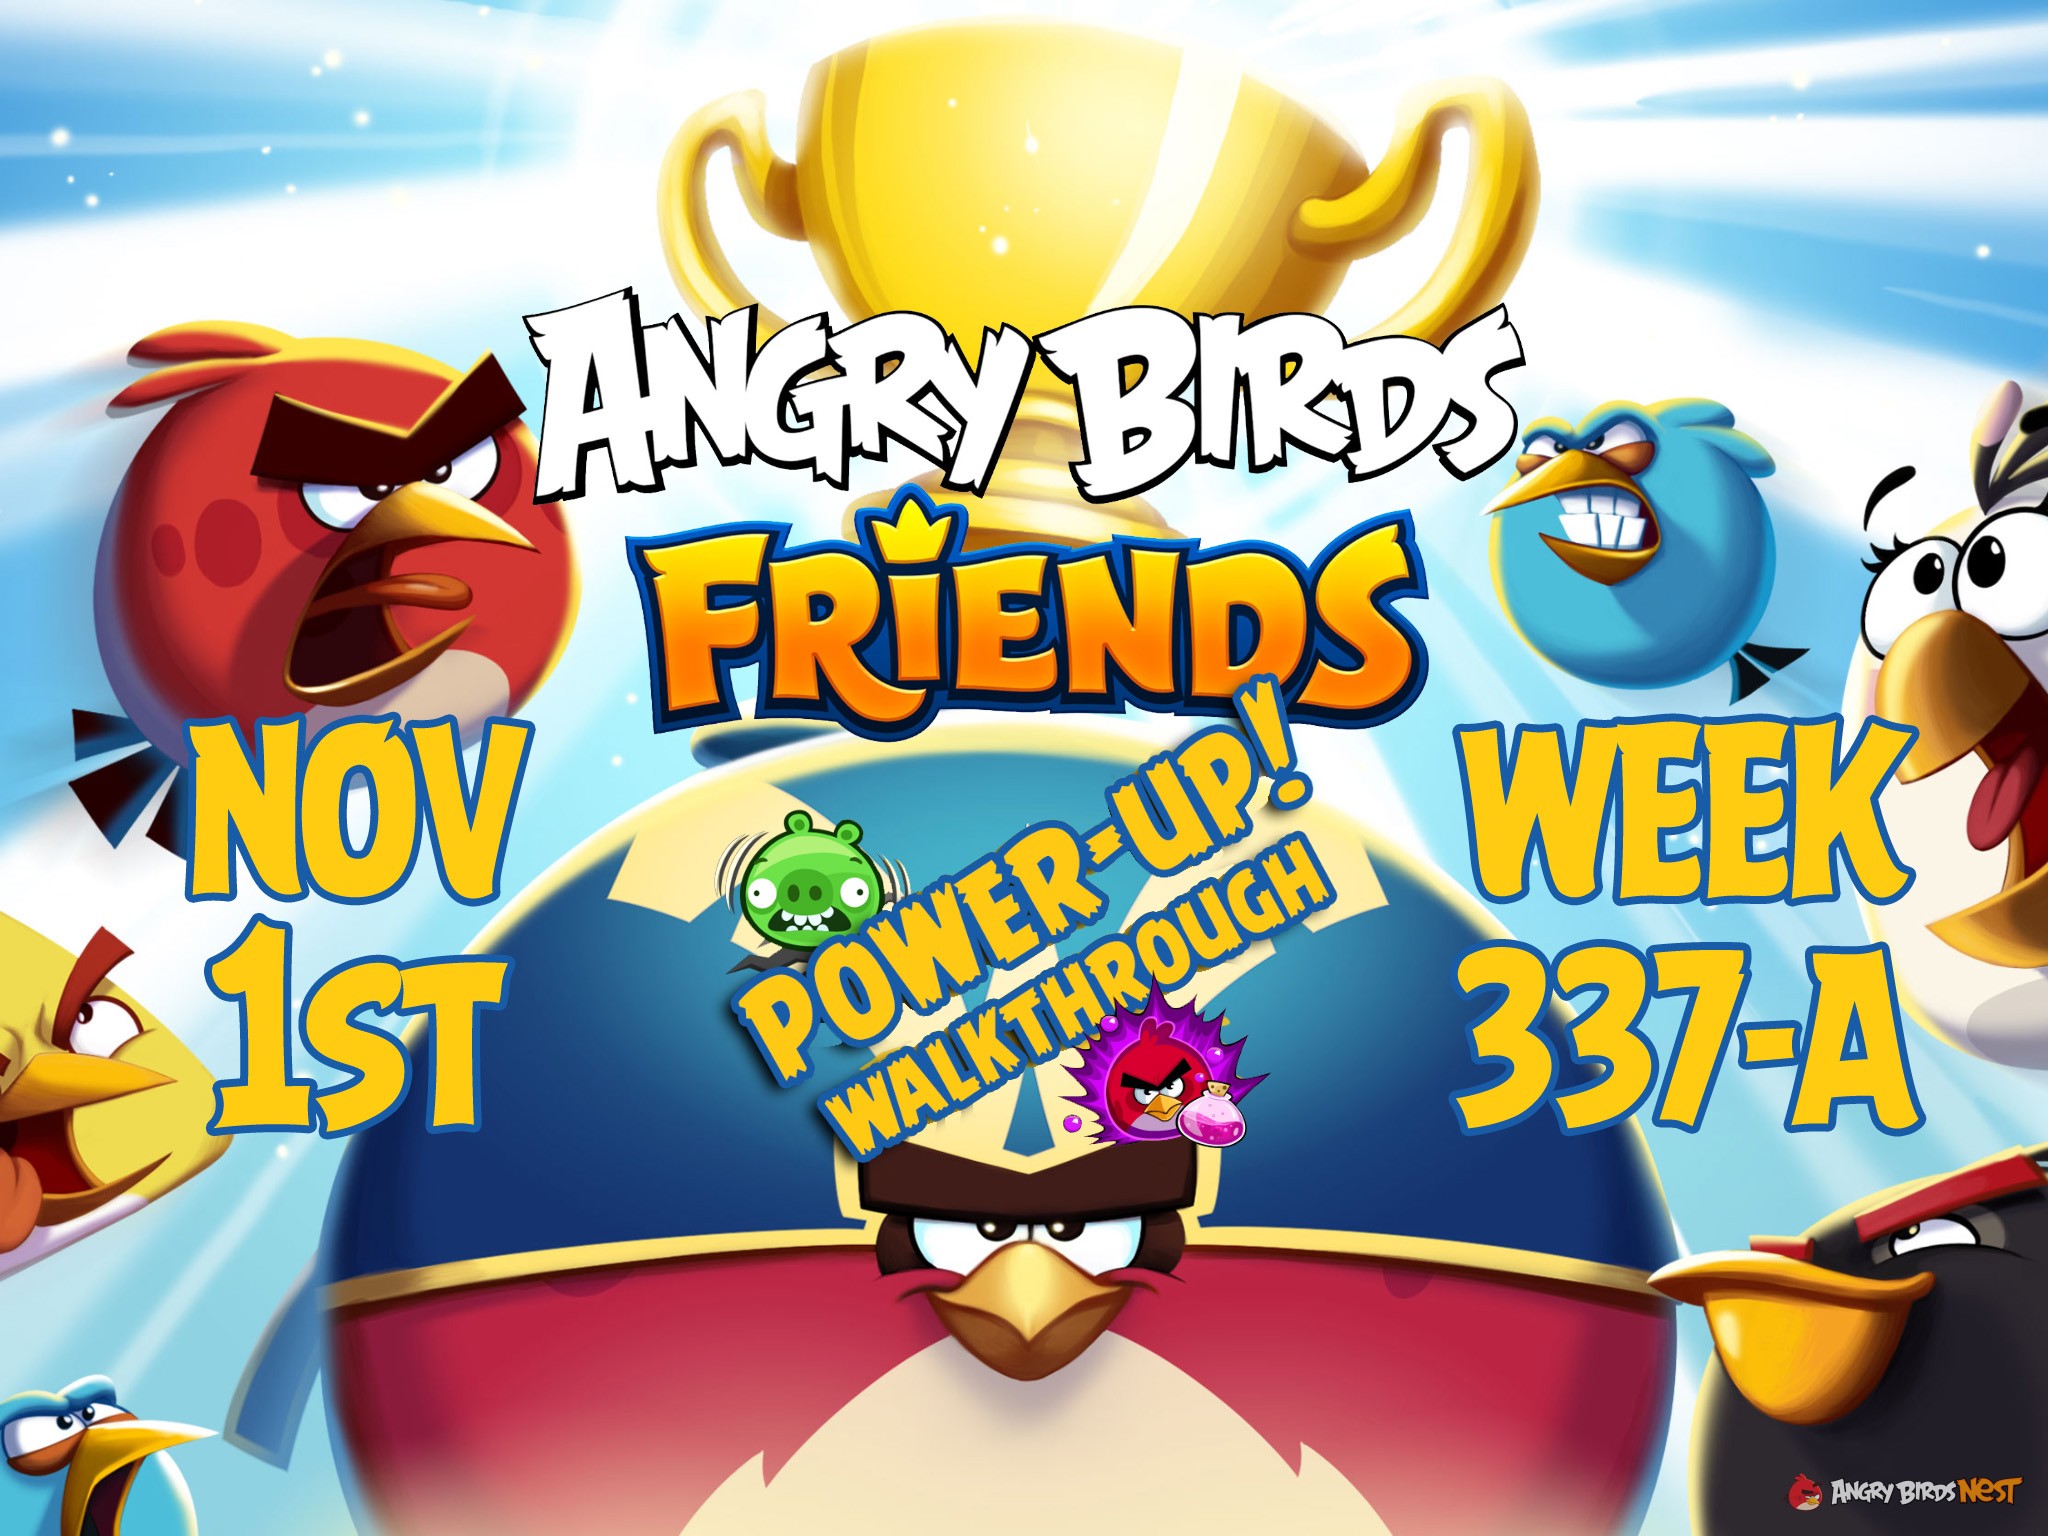 Angry-Birds-Friends-Tournament-Week-337-A-Feature-Image-PU